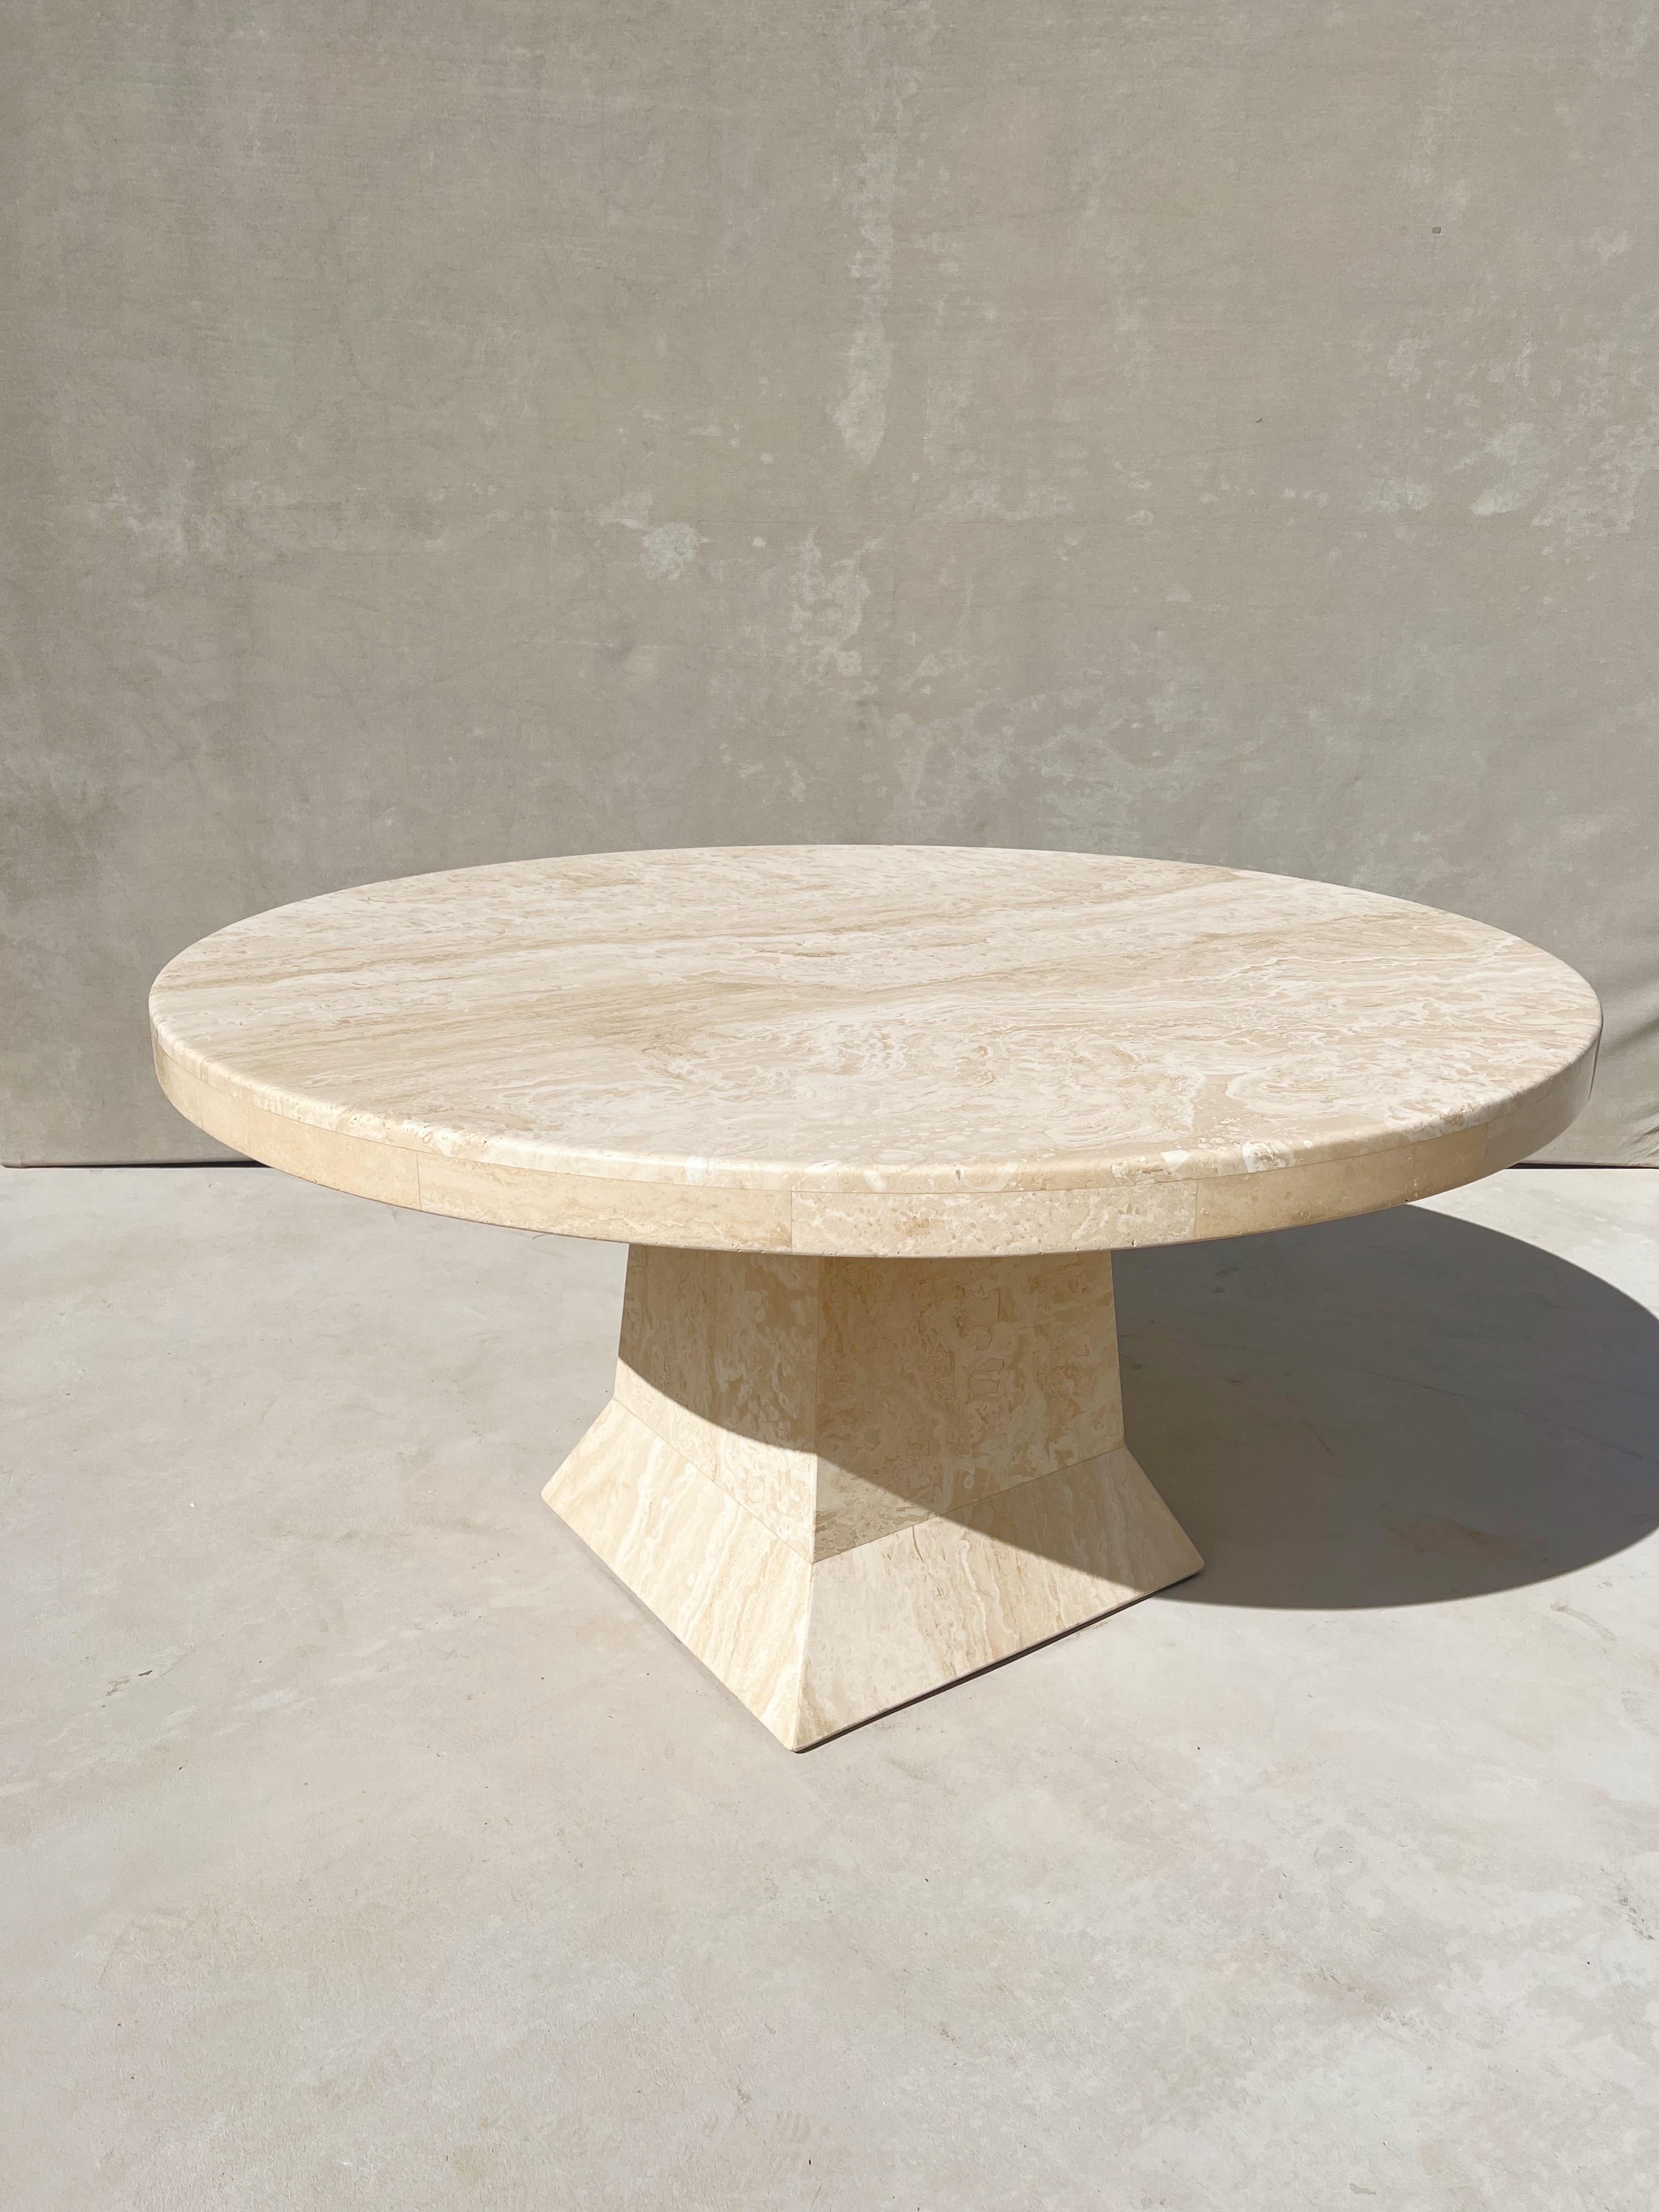 Vintage Modern Italian Travertine Round Dining Table with a Sculptural Base 6